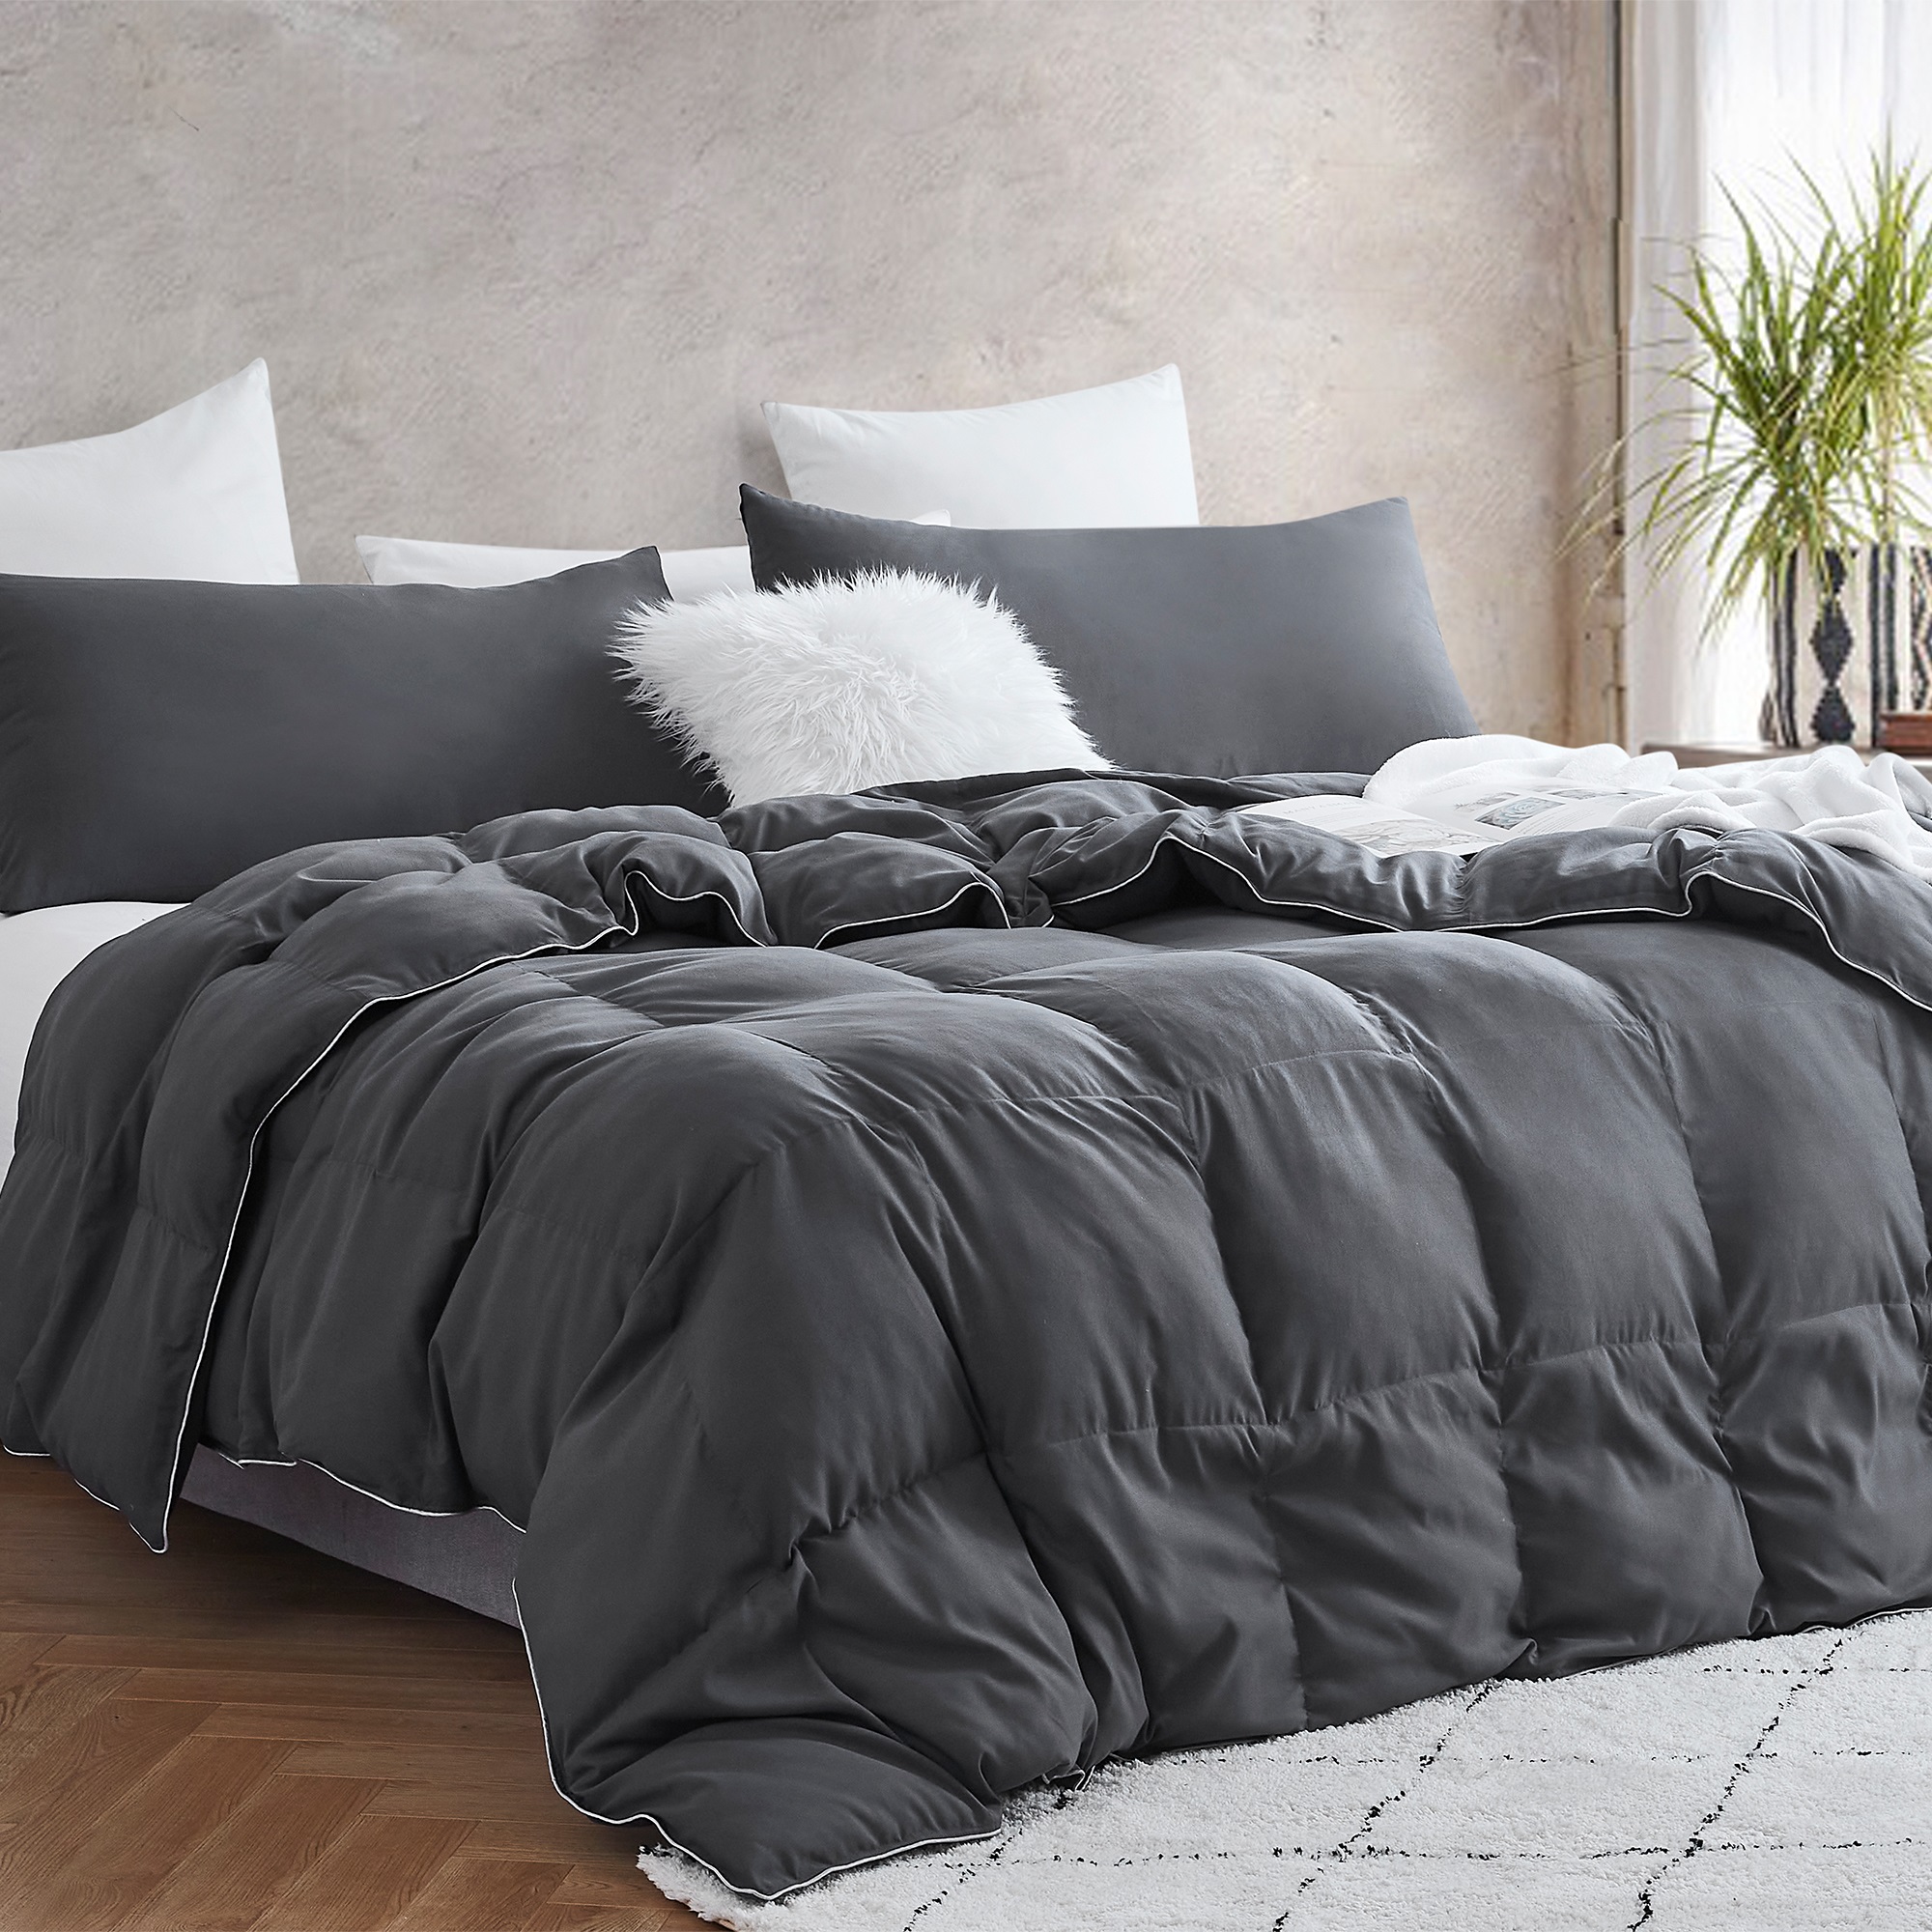 Snorze Cloud Comforter - Coma Inducer - Faded Black